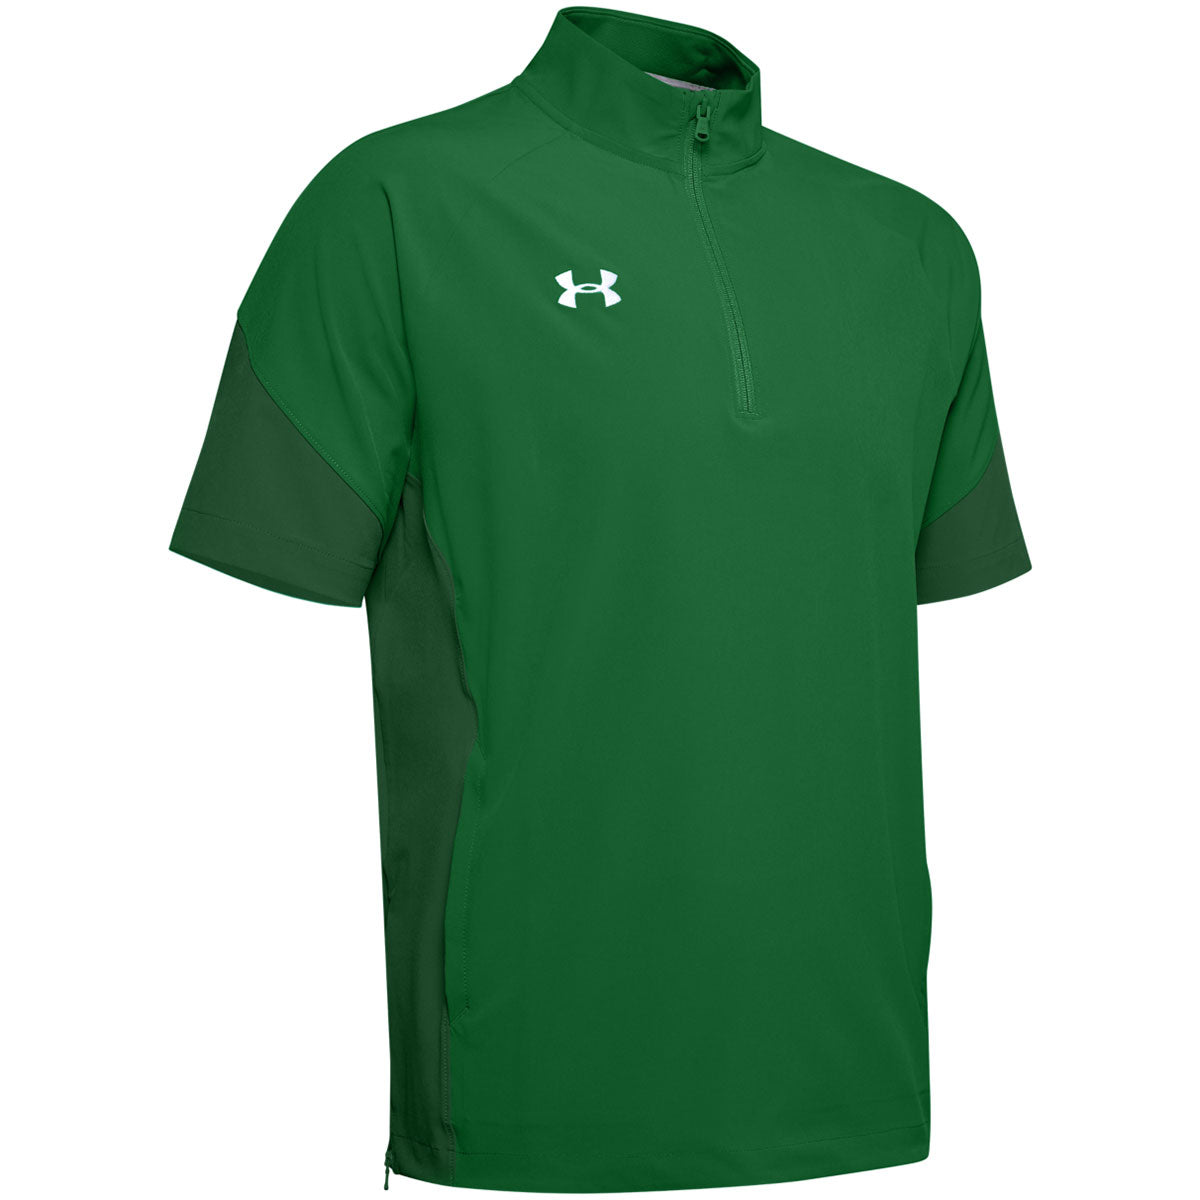 Under Armour Men's Green Payload Button Down Long Sleeve Work